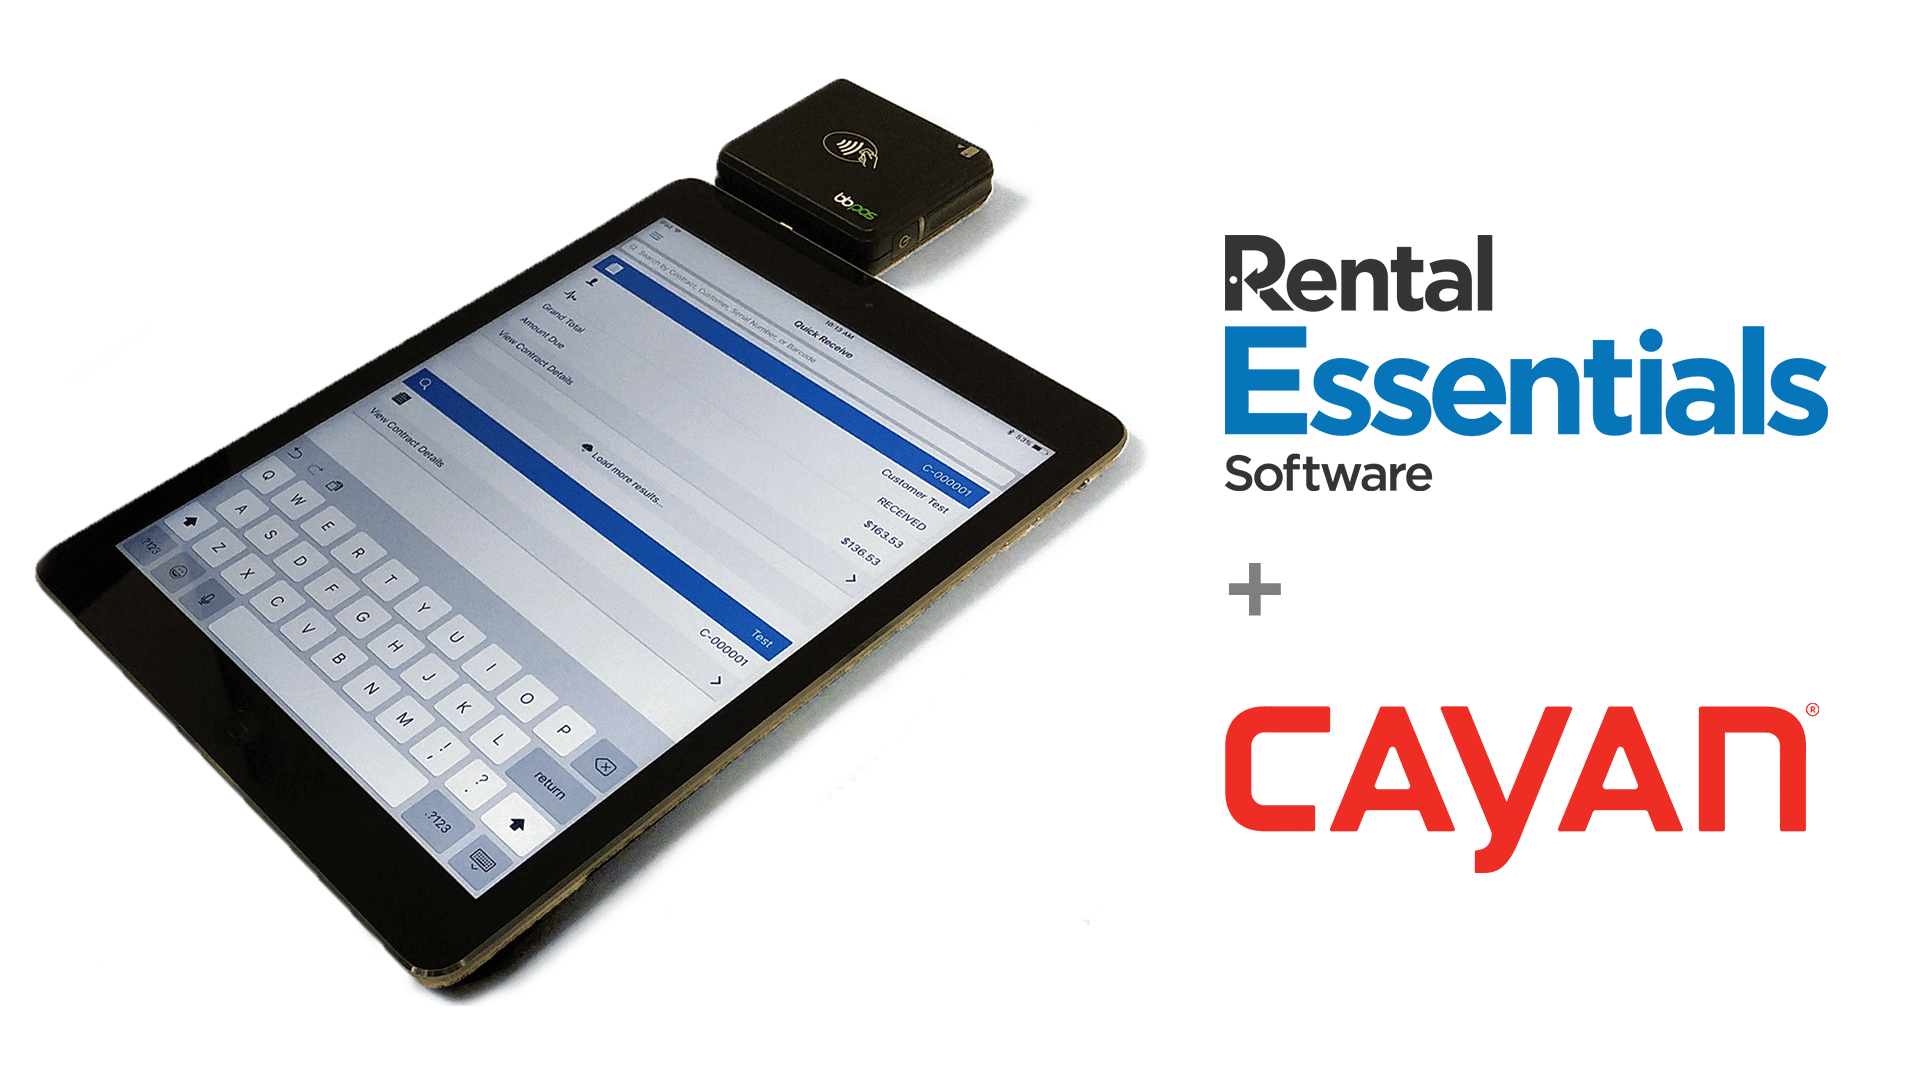 Rental Essentials and Cayan Genius Mini make mobile payments easy.